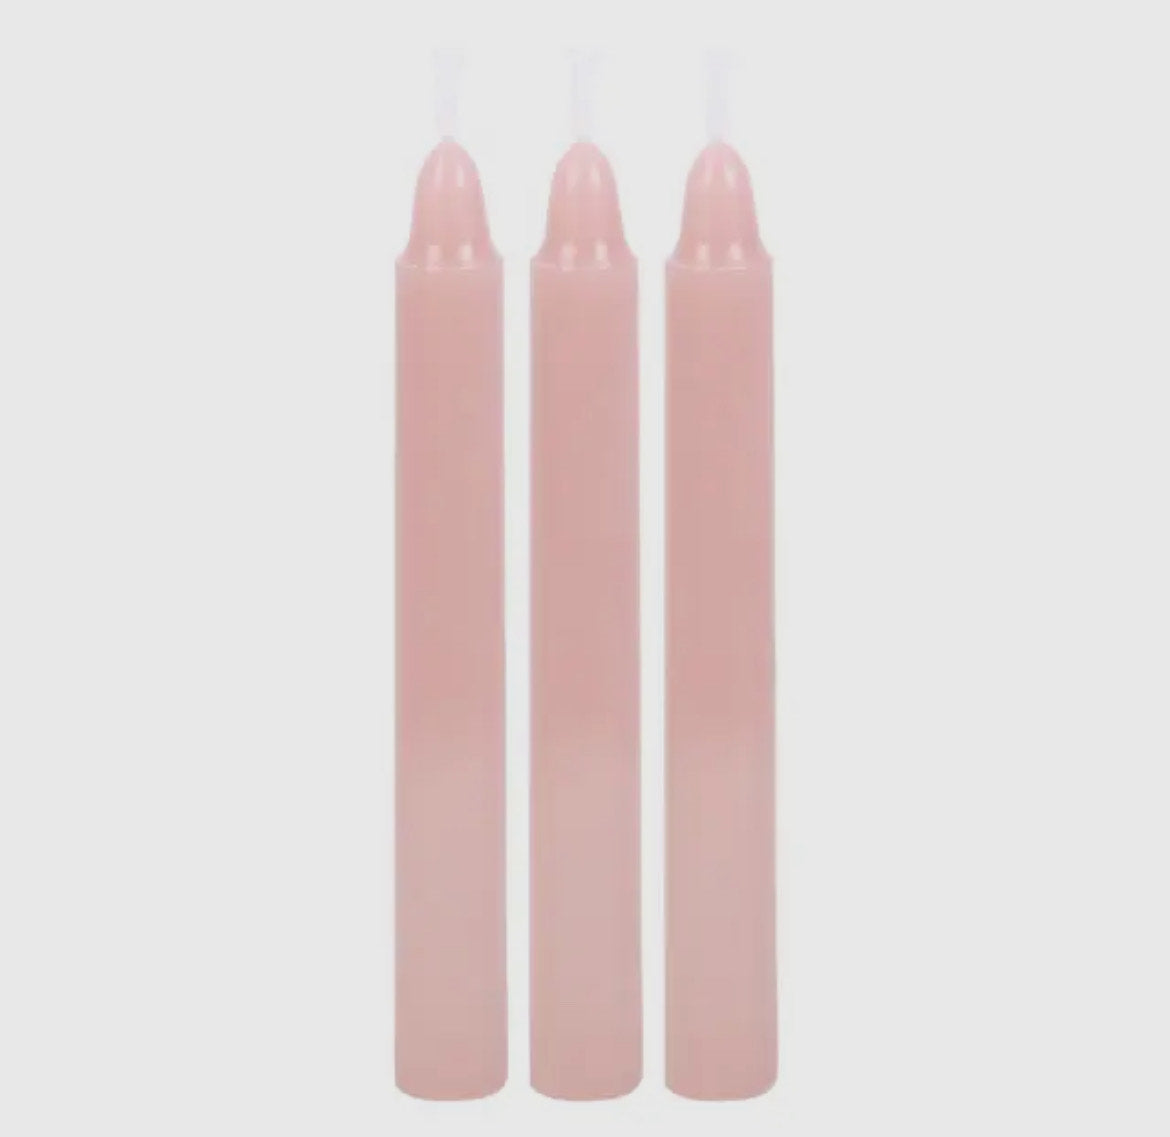 Pack of 12 Light Pink Self Love Magic Spell Candles